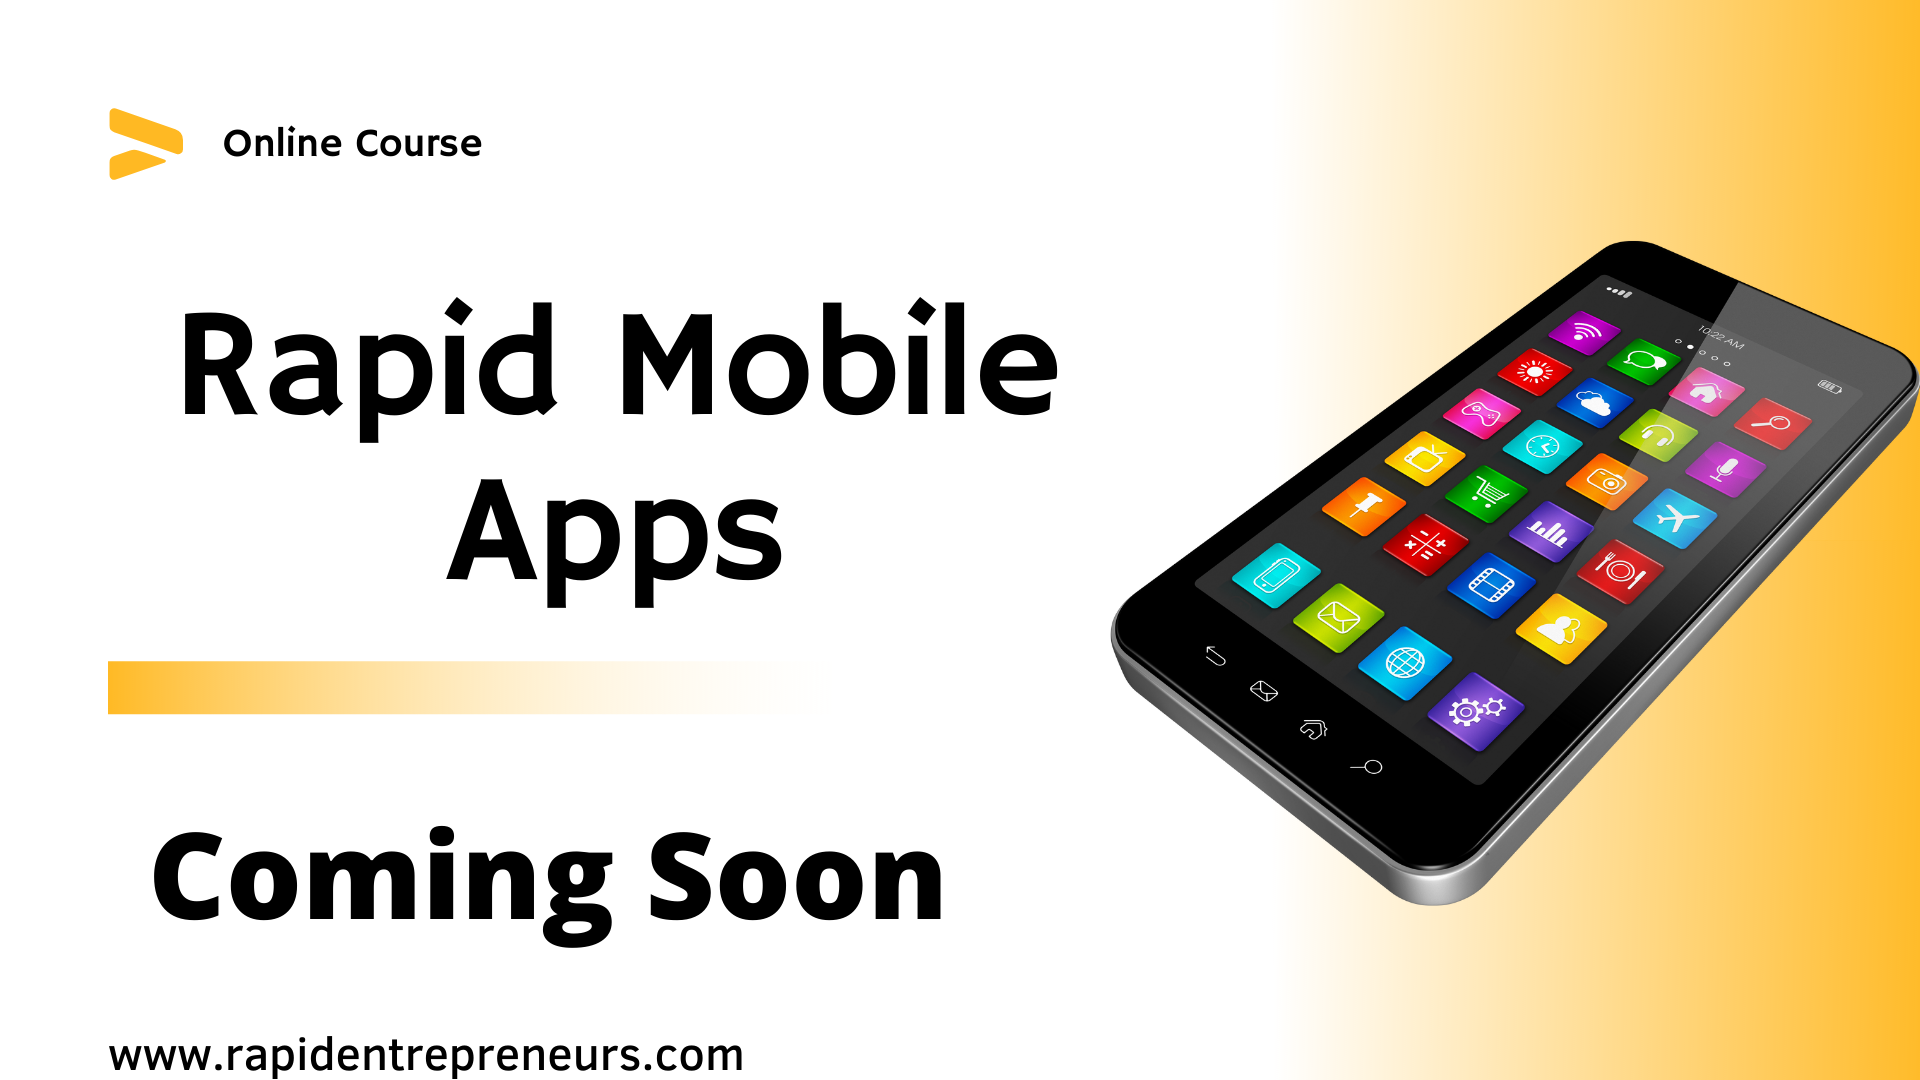 Rapid Mobile Apps